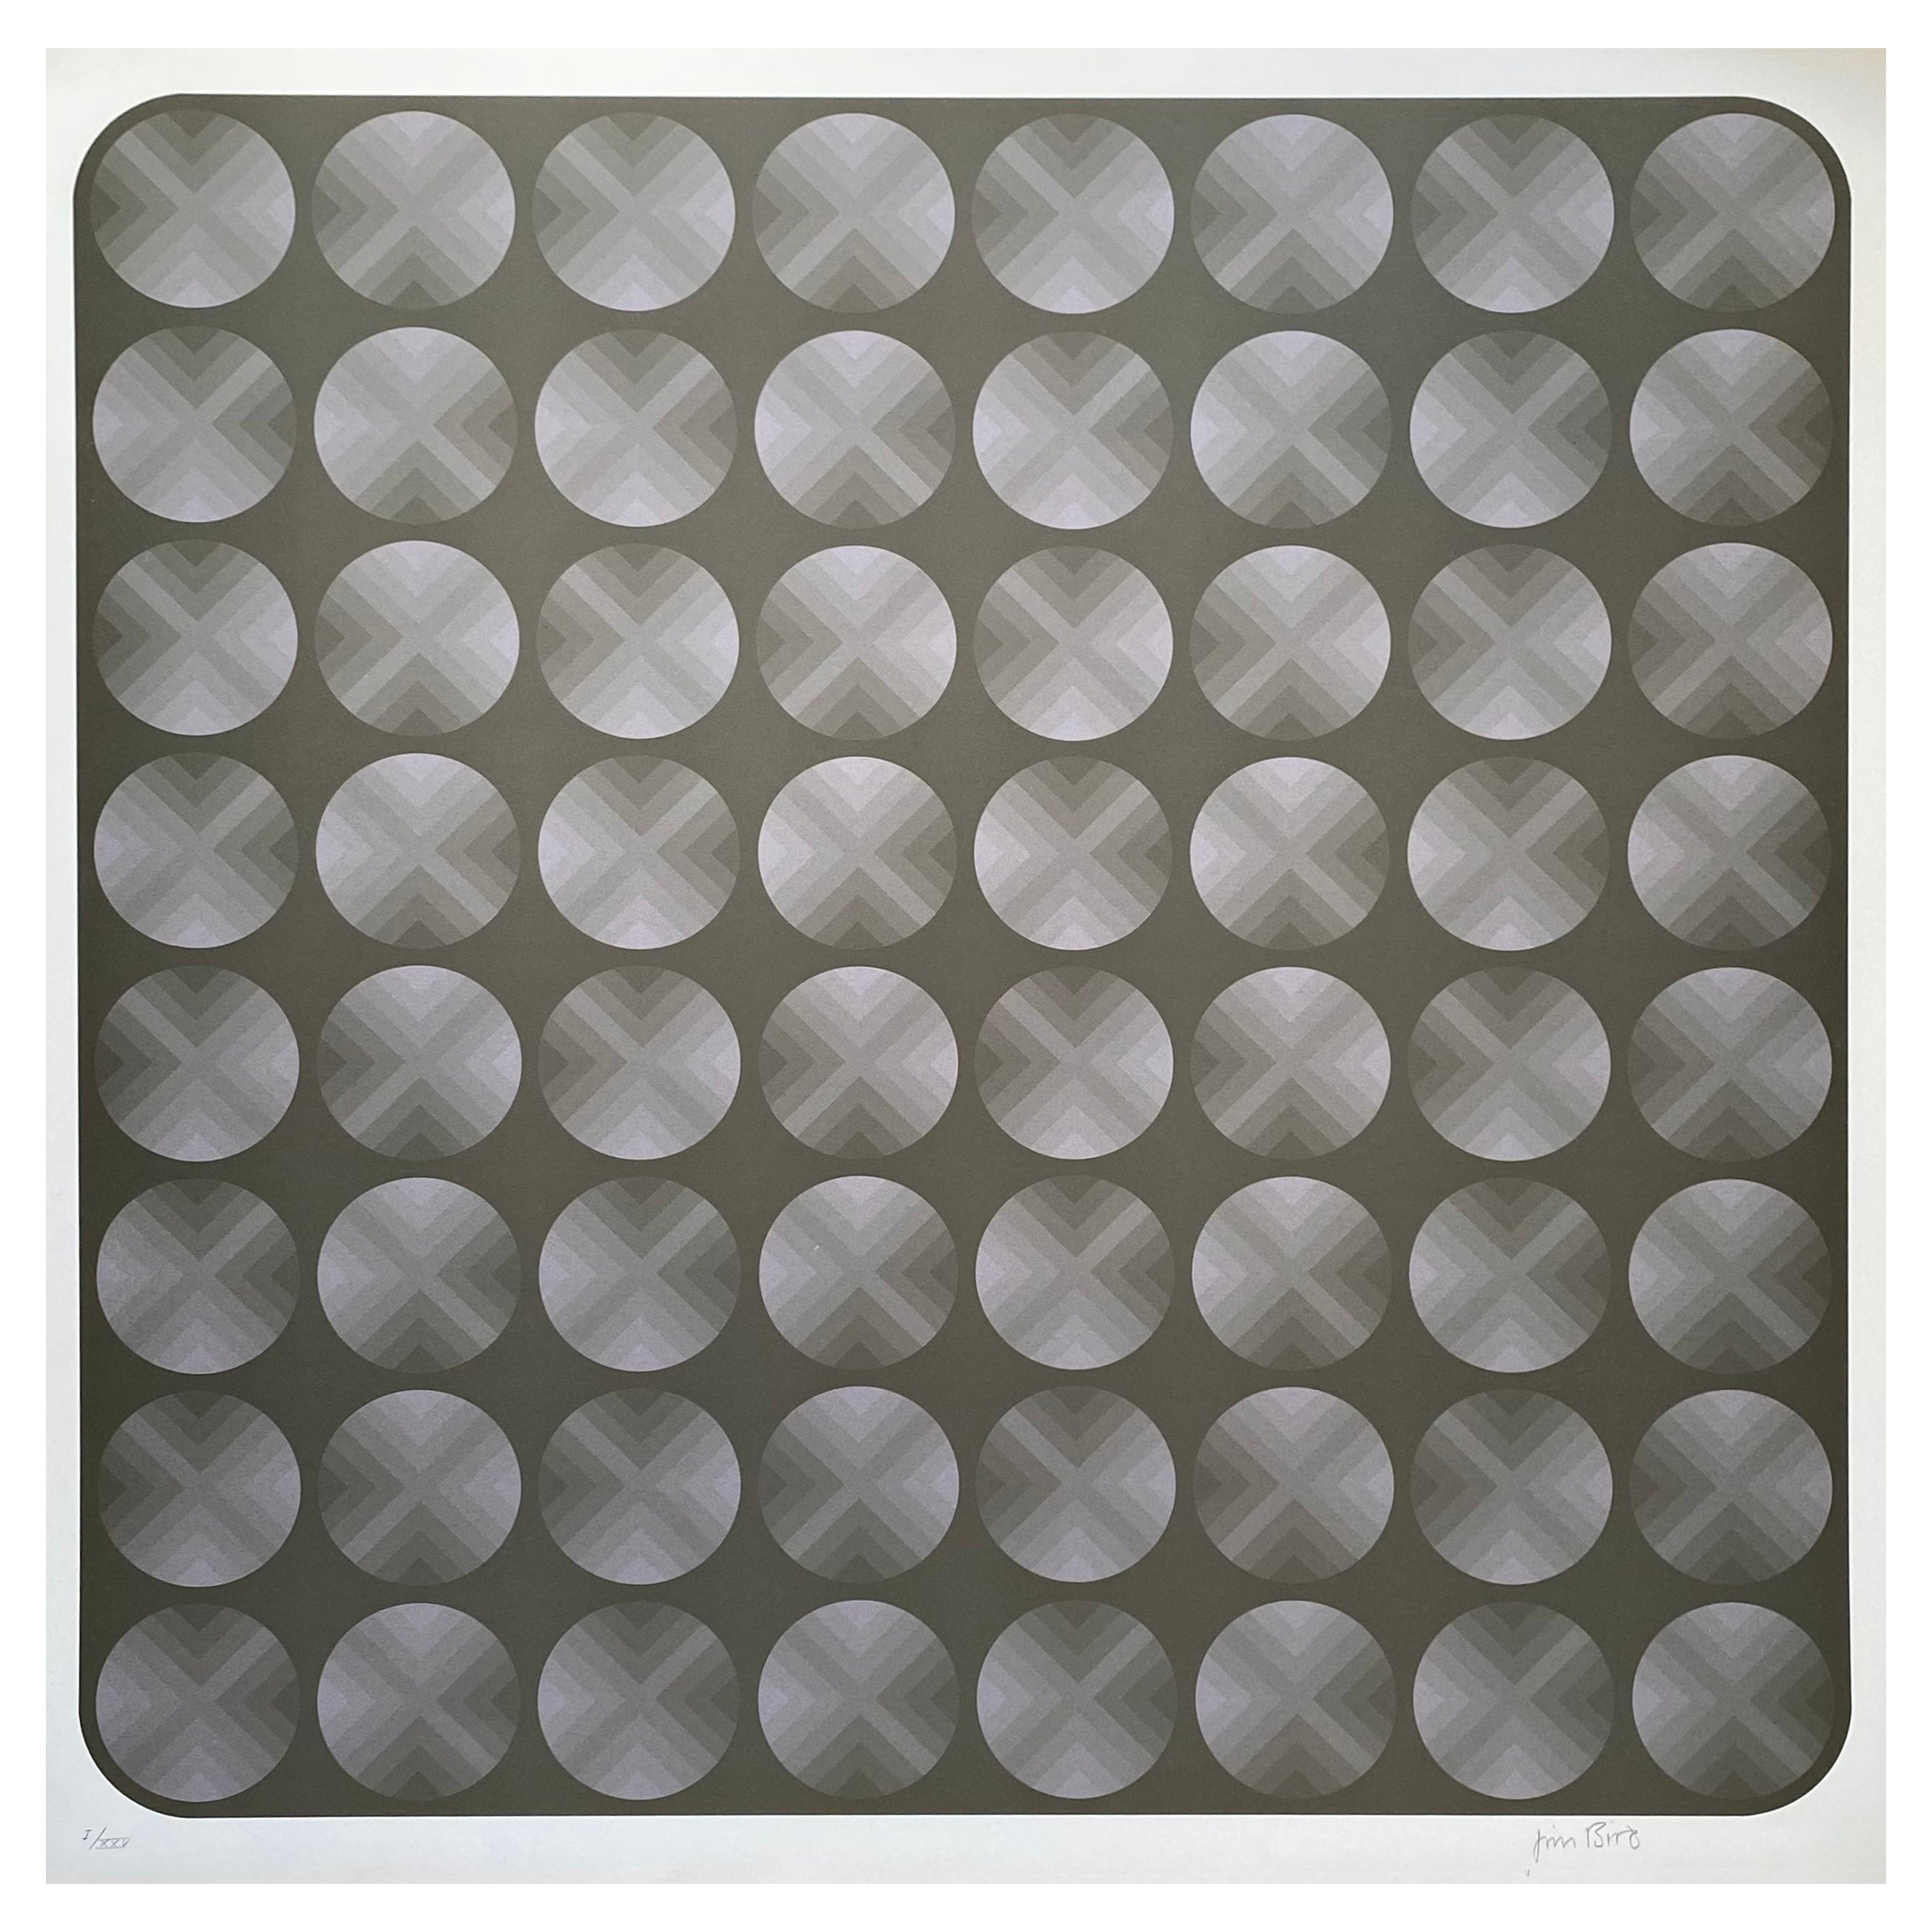 Jim Bird, Tribute to Vasarely 5, 1970 For Sale